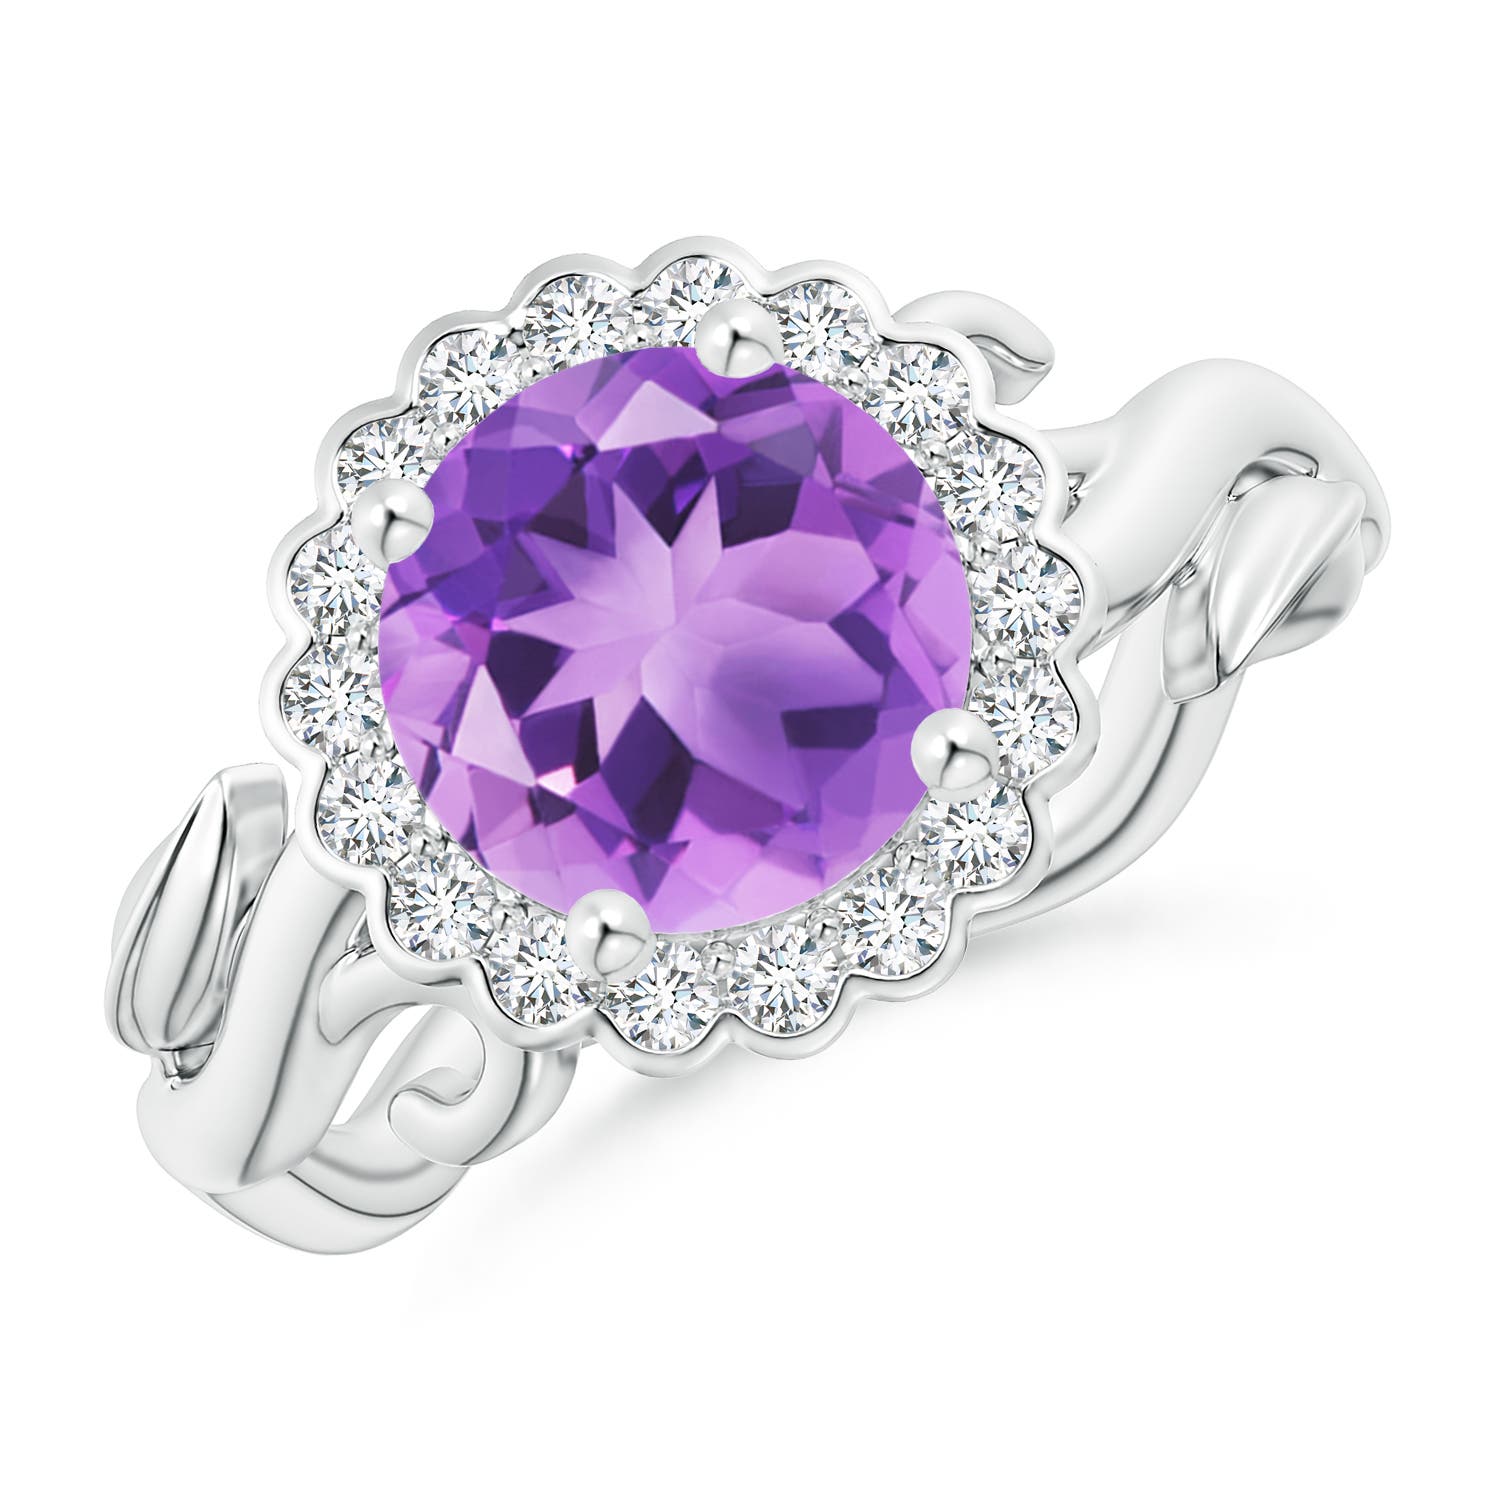 A - Amethyst / 1.95 CT / 14 KT White Gold